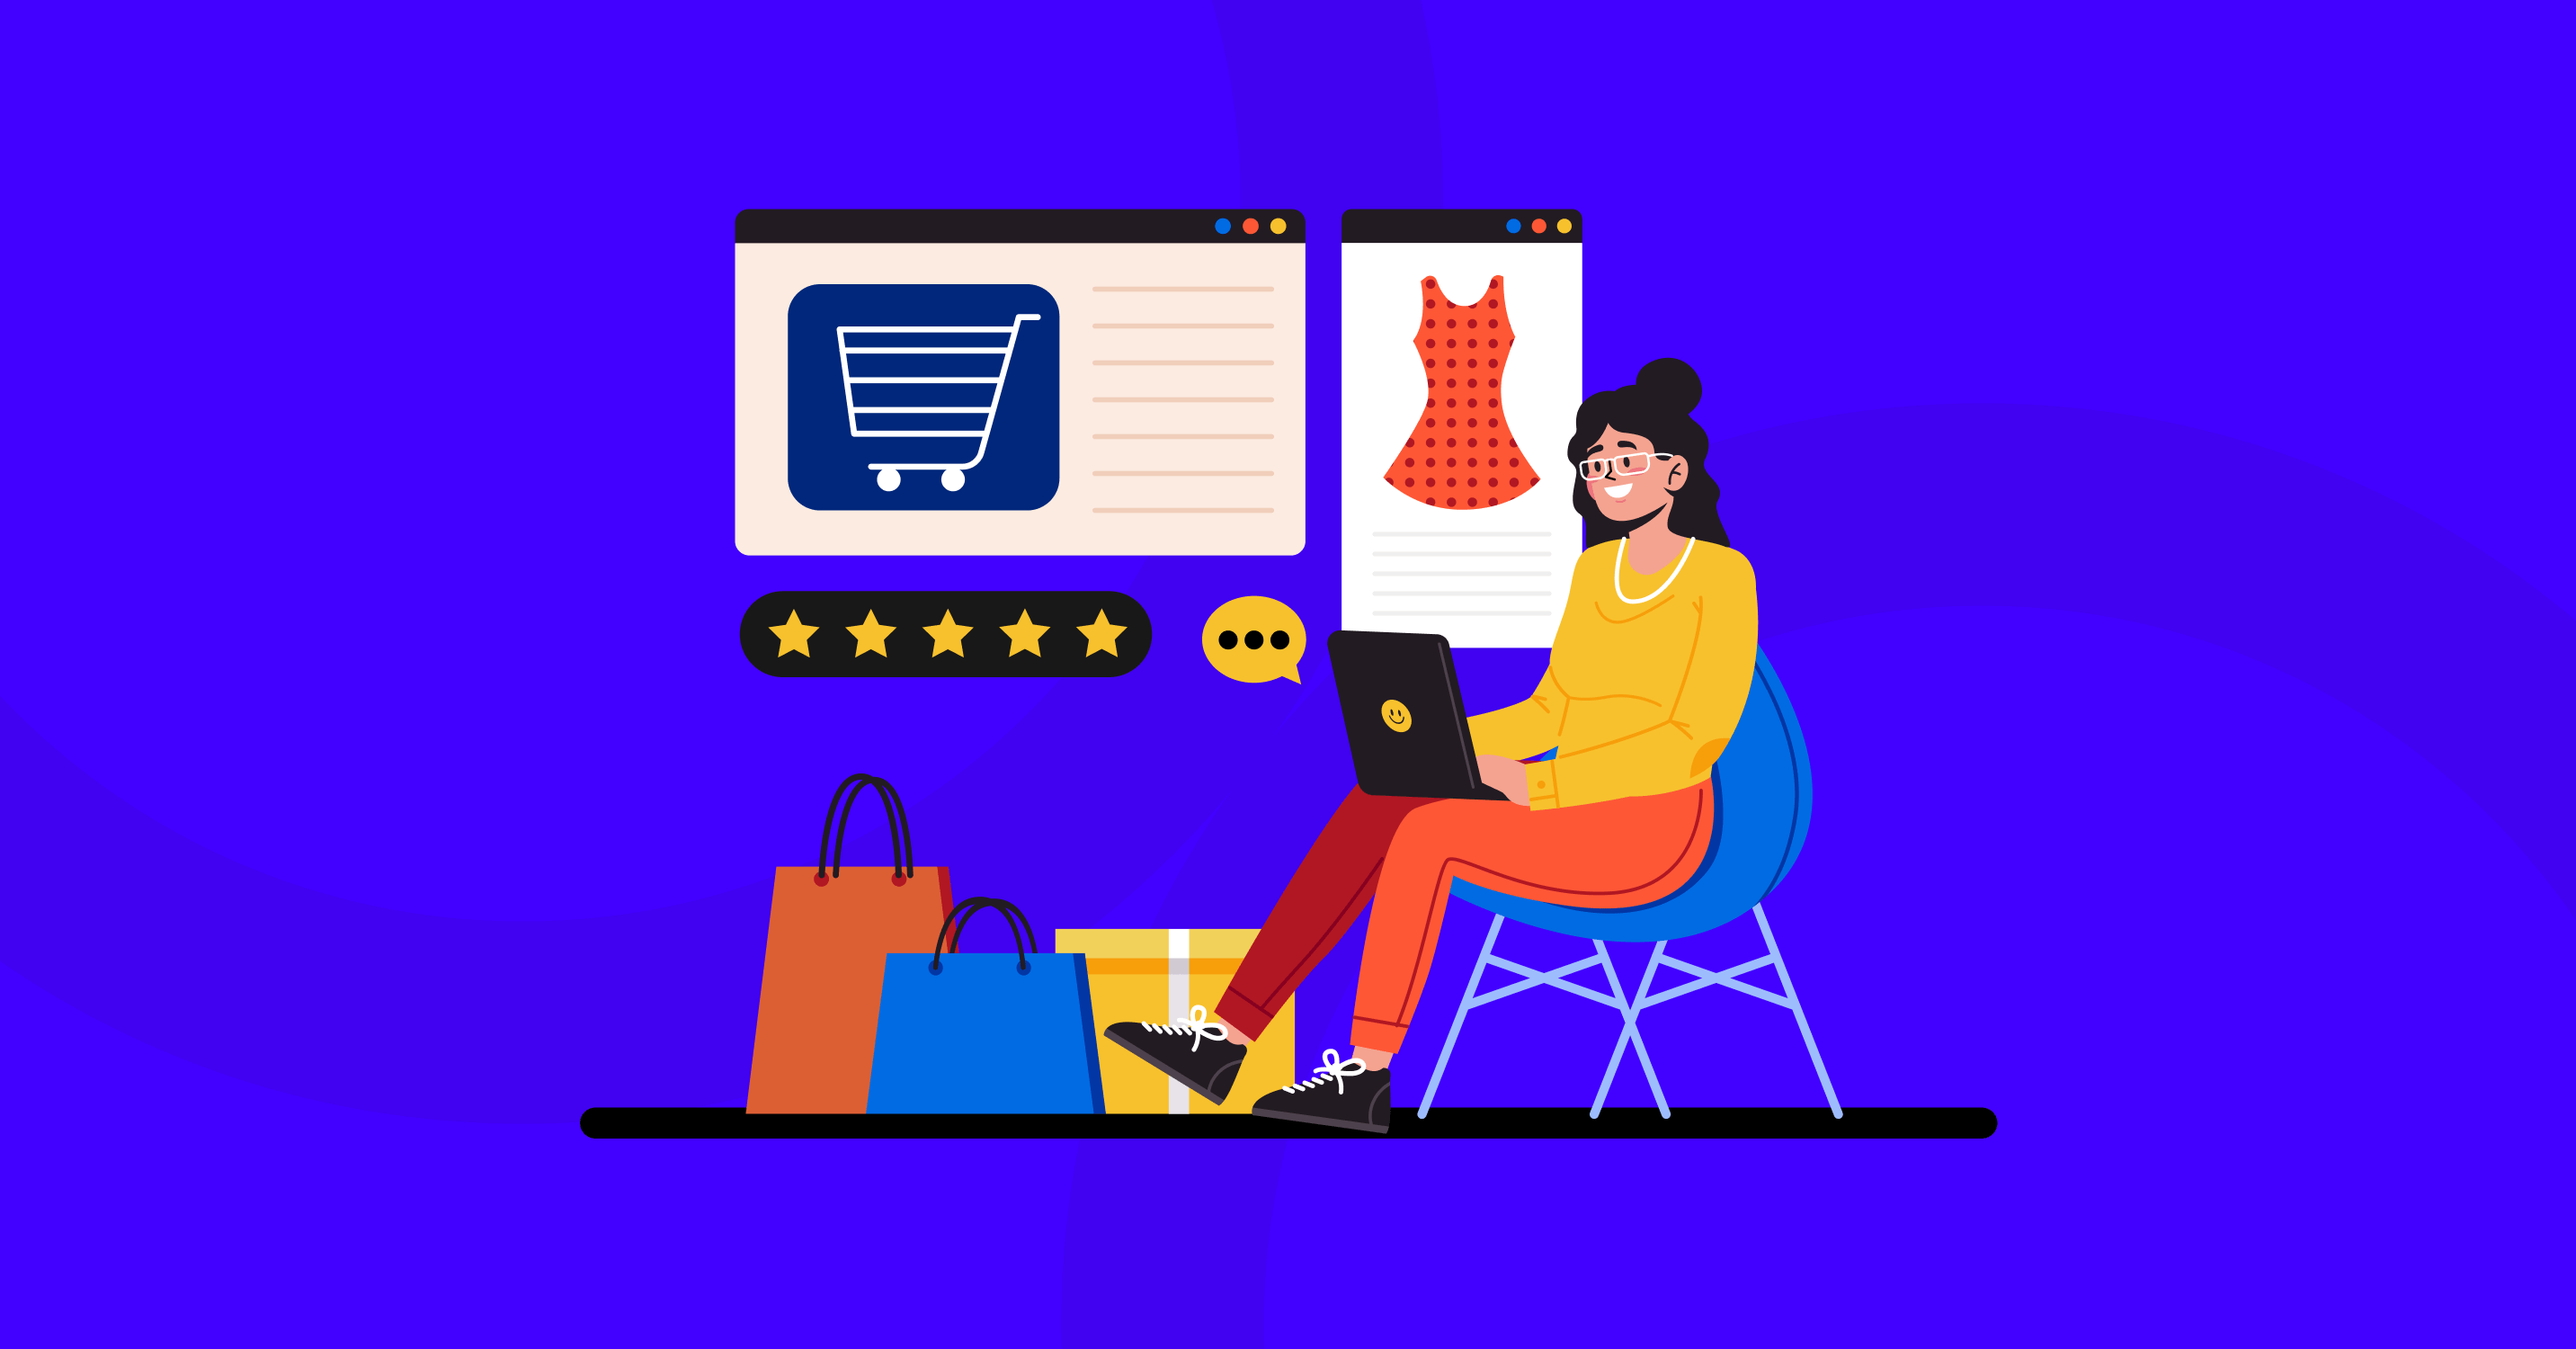 Ecommerce essentials for online stores